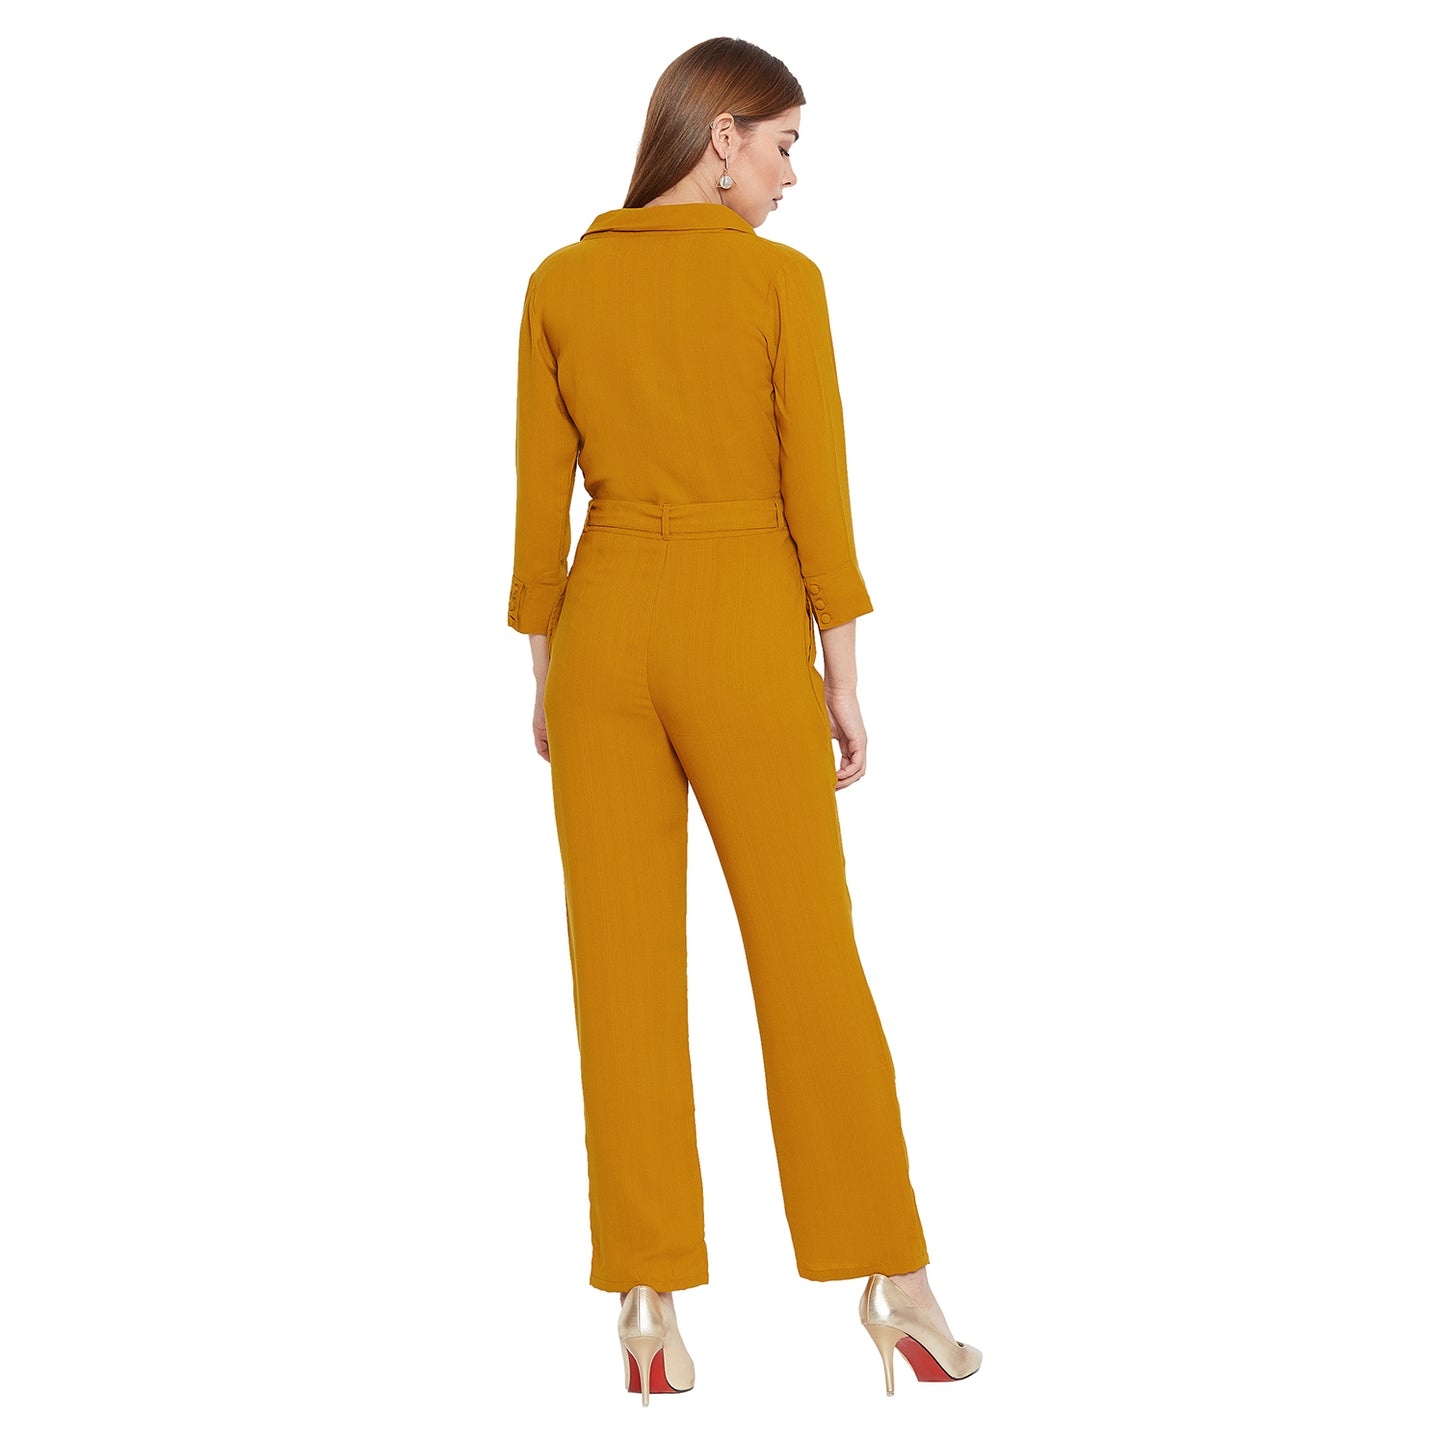 Women'S Solid Mud Yellow Full Length Crepe Jumpsuit